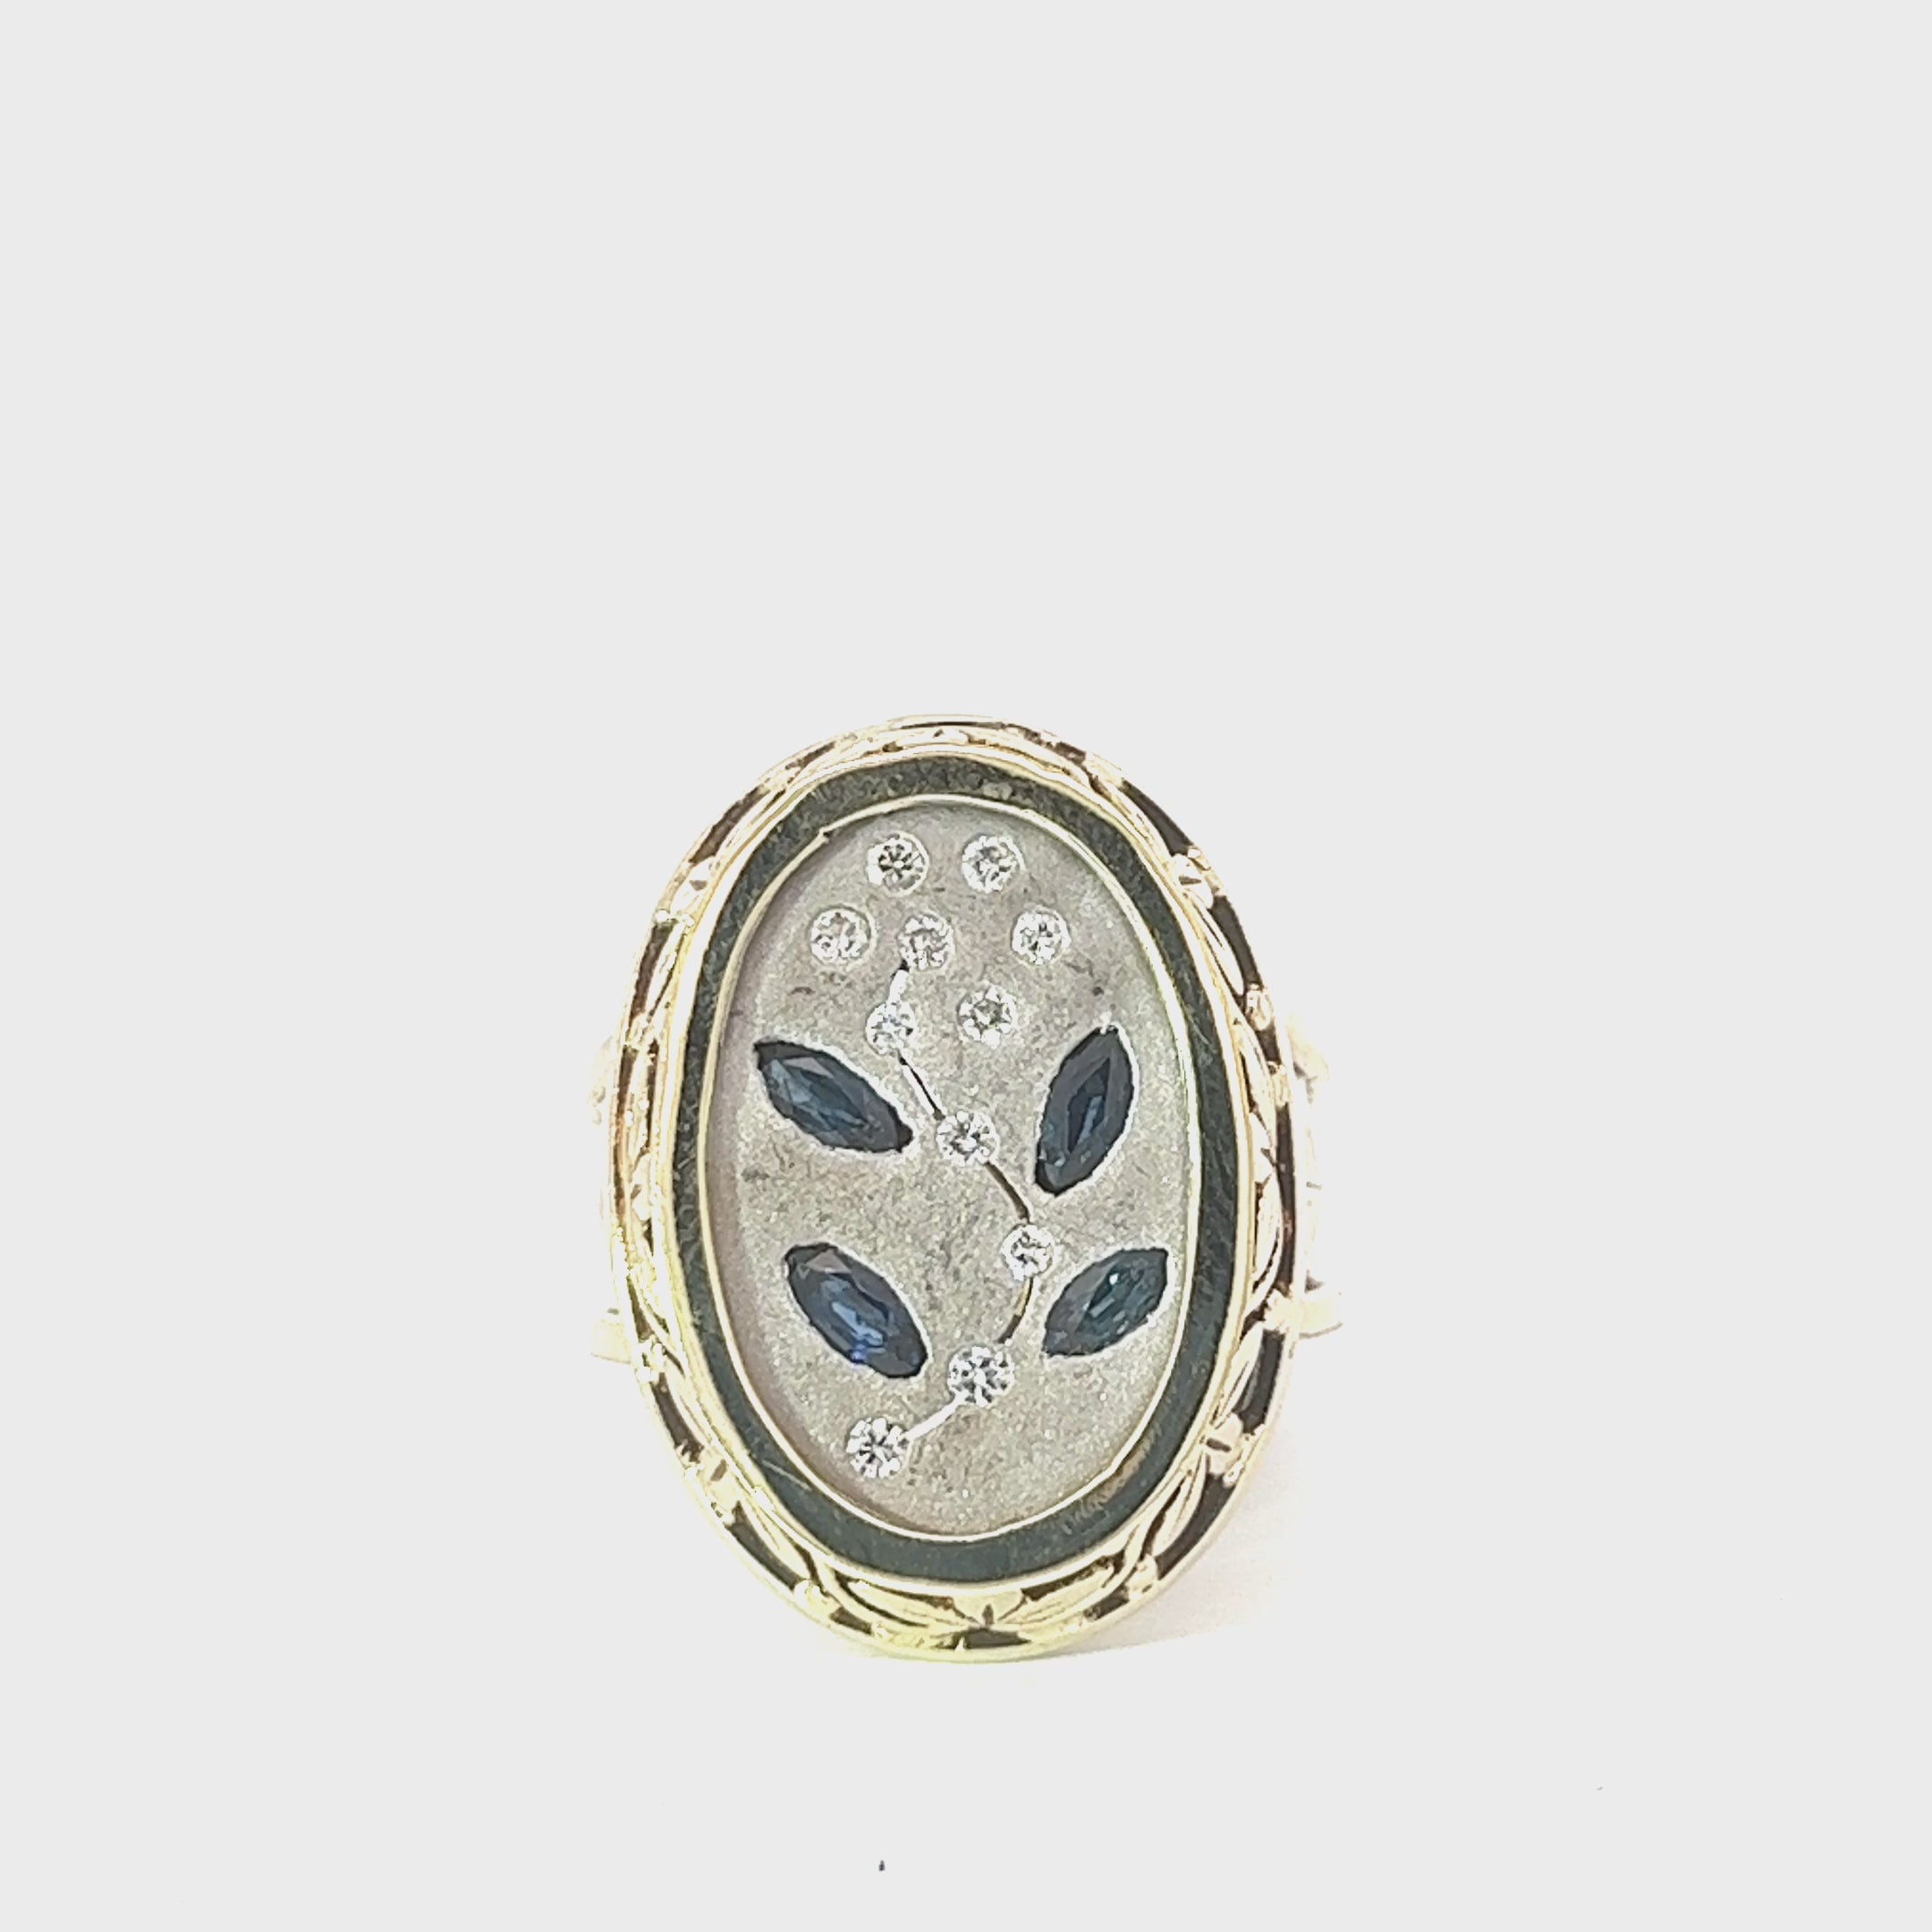 14K TWO TONE .15CT TOTAL WEIGHT OF DIAMOND AND .25CT BLUE SAPPHIRE VINTAGE FLORAL RING 12.7GRAM